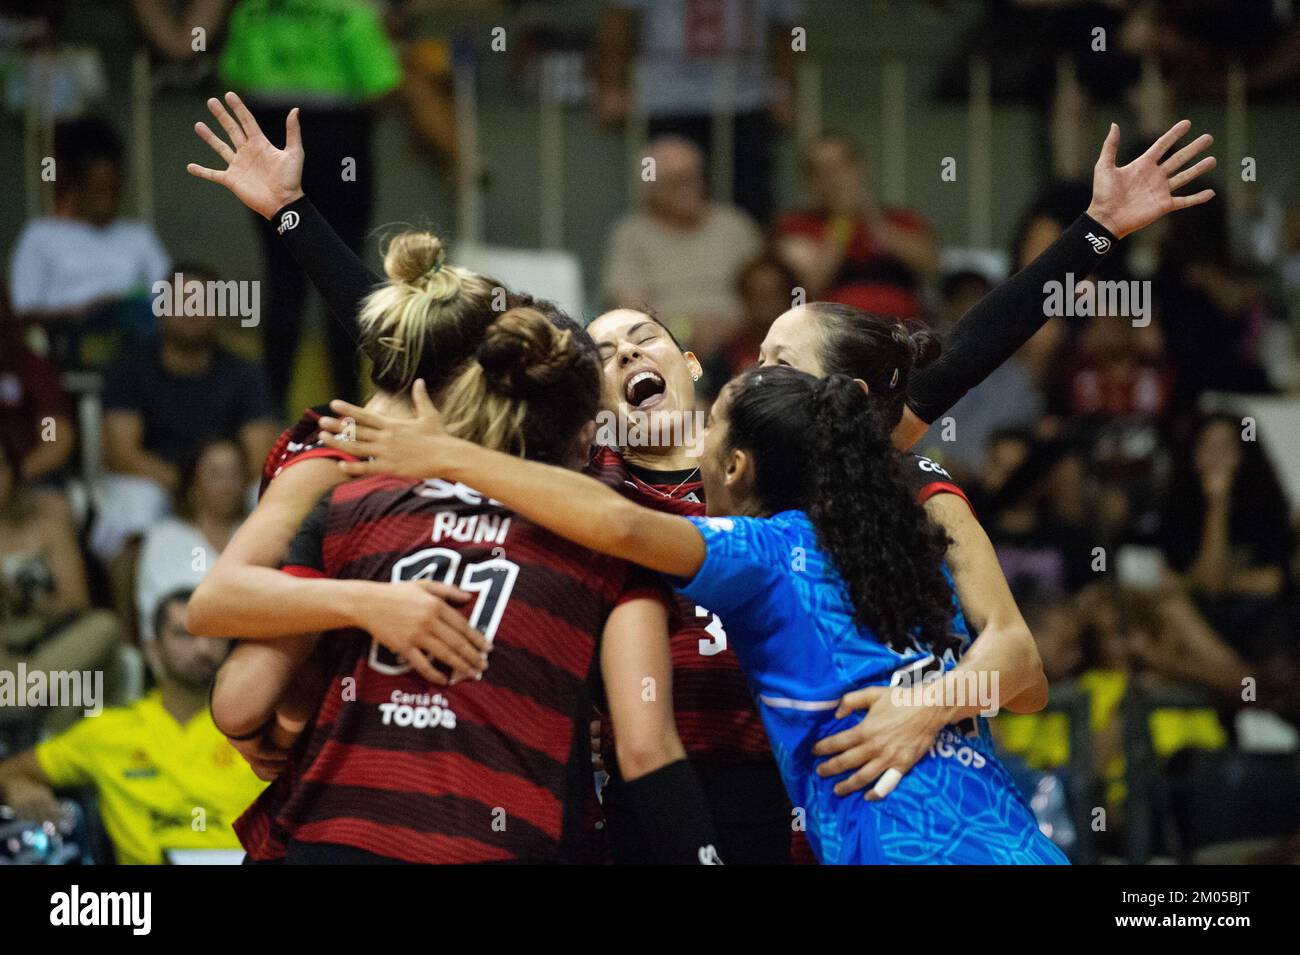 Rio De Janeiro, Brazil. 03rd Dec, 2022. Game between Sesc Flamengo and Esporte Clube Pinheiros in the eighth round of the Volleyball Women's Super League, held at the Tijuca Tênis Clube Gym in the city of Rio de Janeiro, RJ. Credit: Renato Assis/FotoArena/Alamy Live News Stock Photo